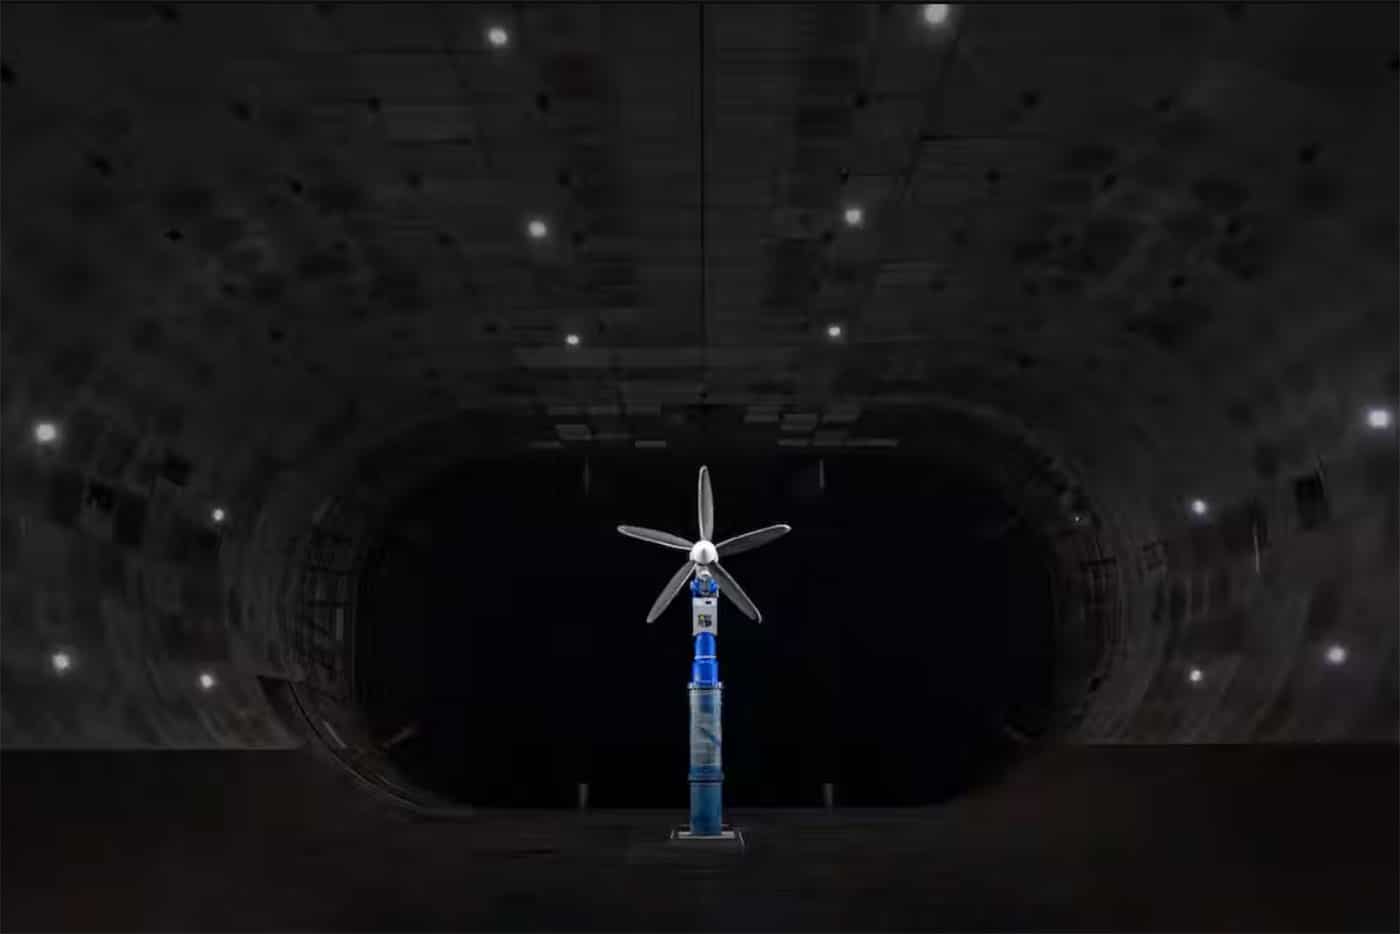 Joby begins testing his eVTOL in the world's largest wind tunnel